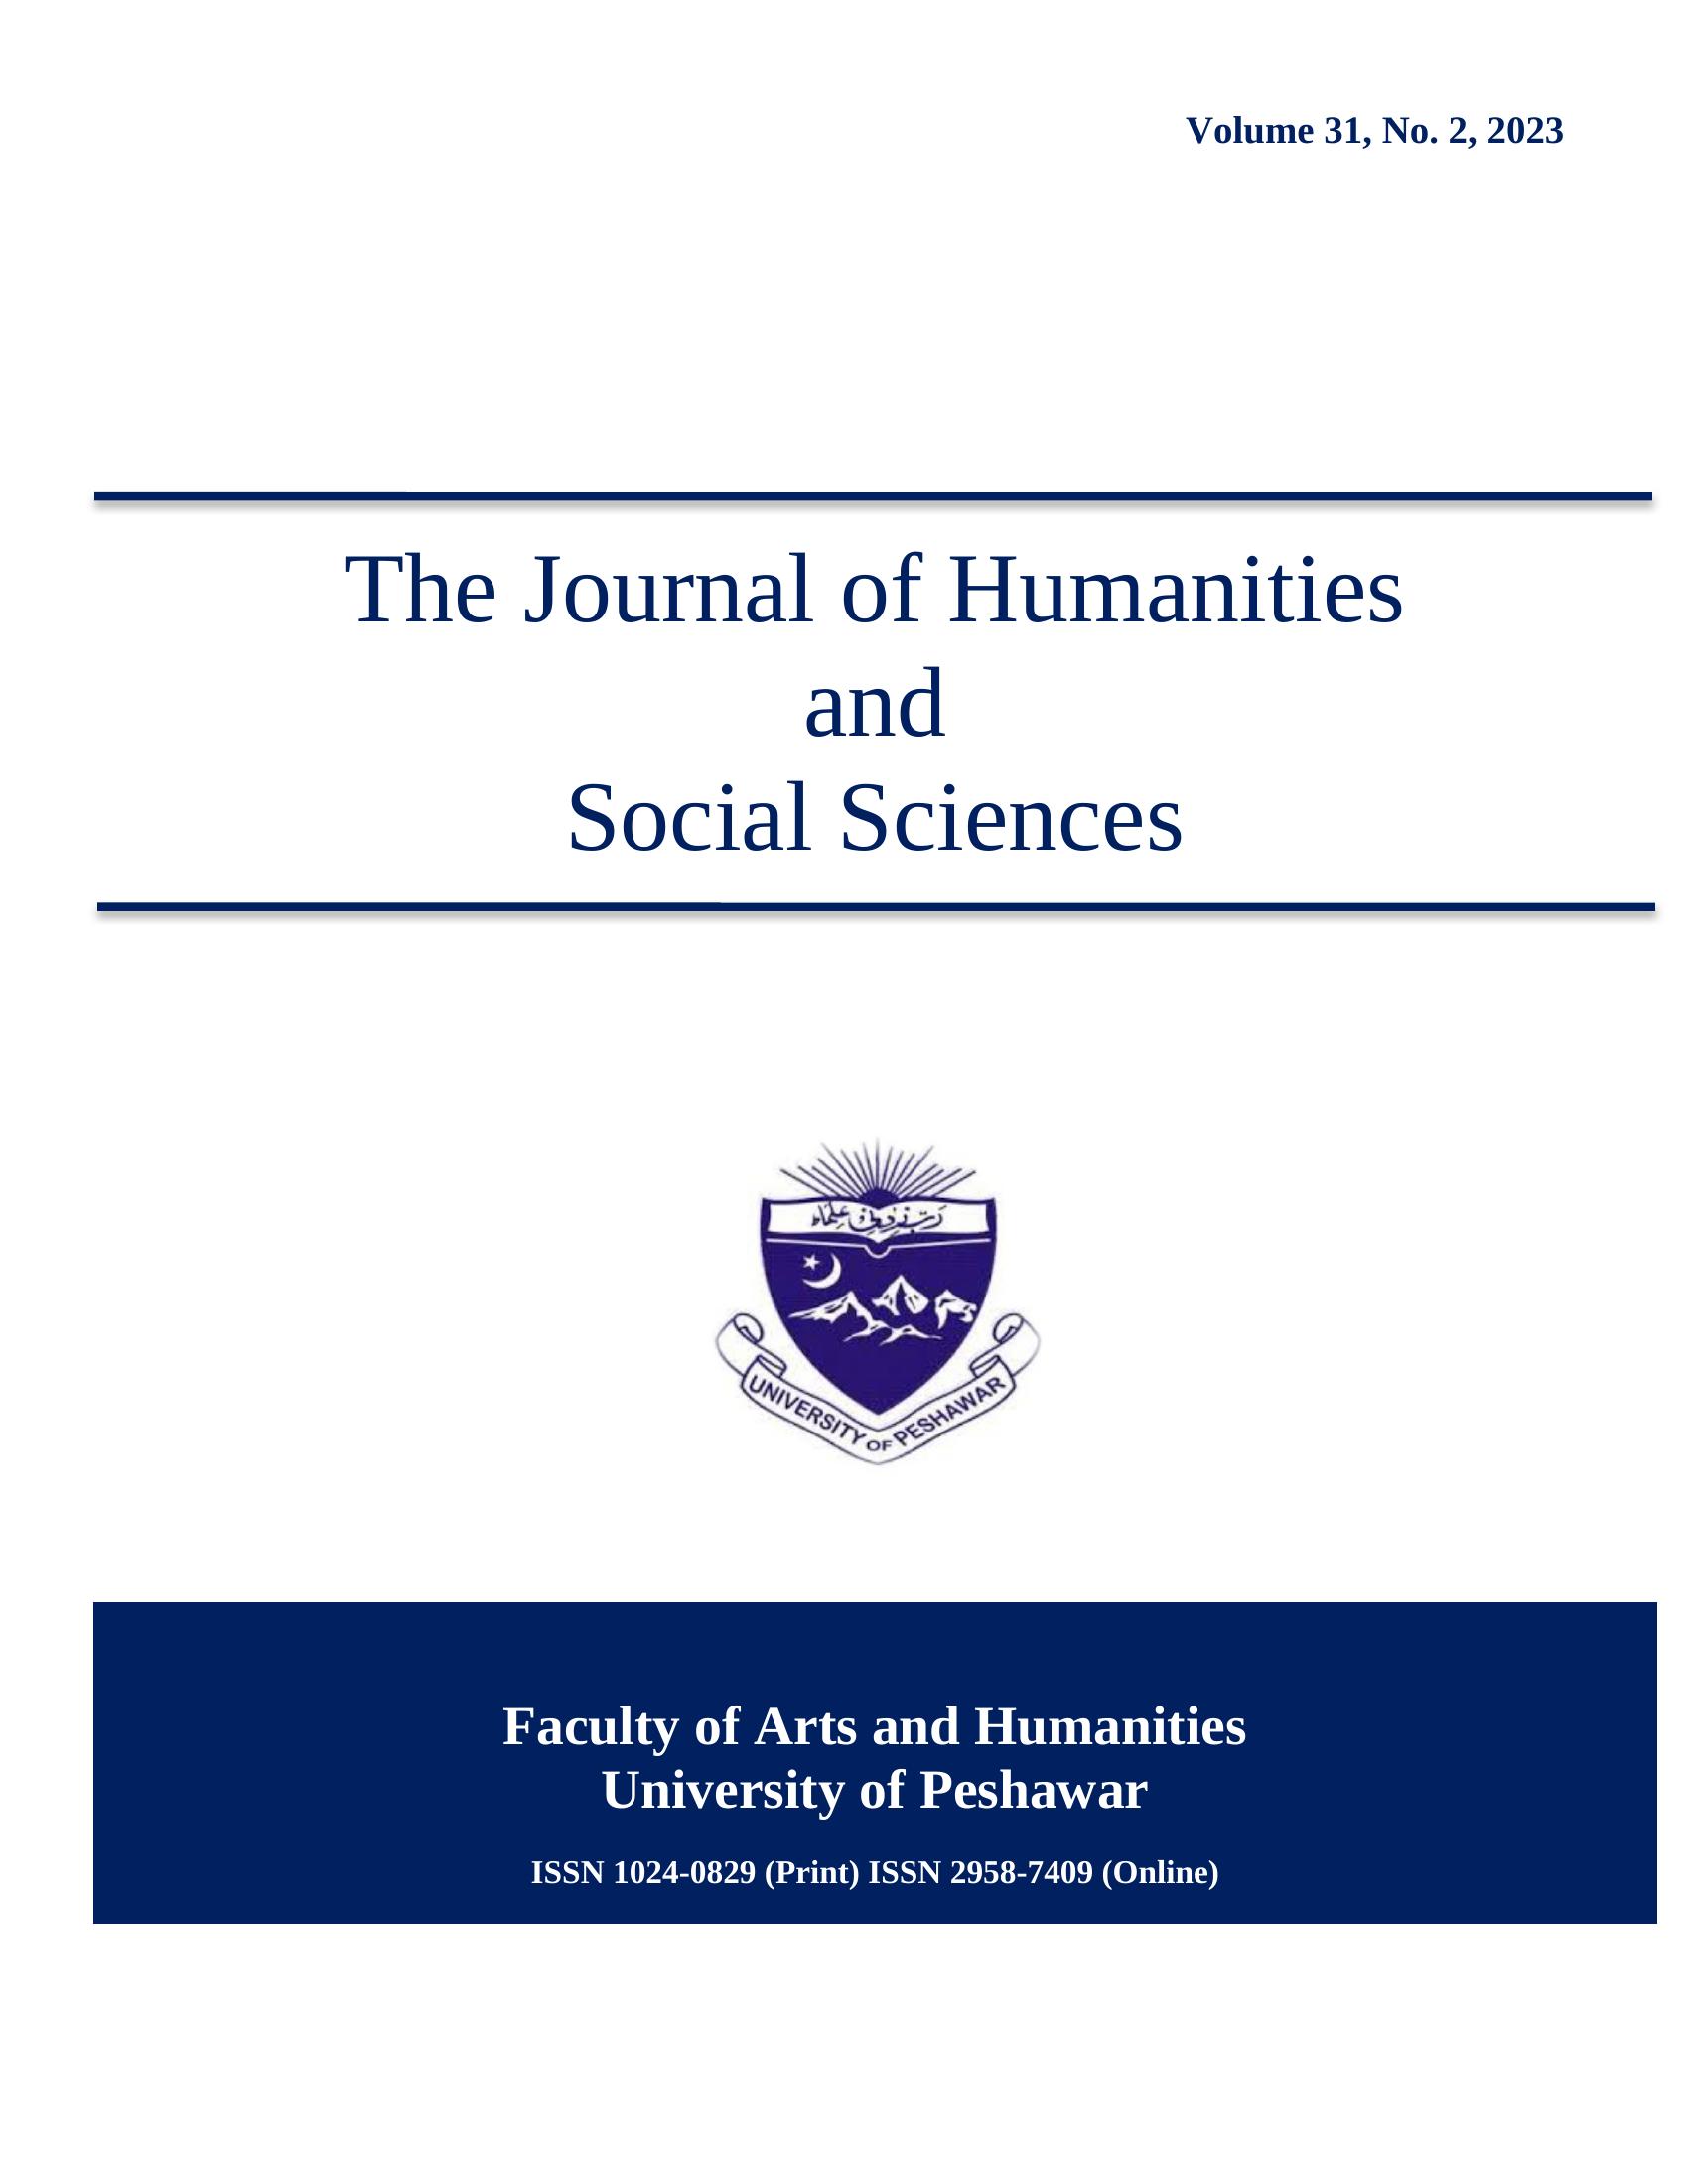 					View Vol. 31 No. 2 (2023): The Journal of Humanities and Social Sciences
				